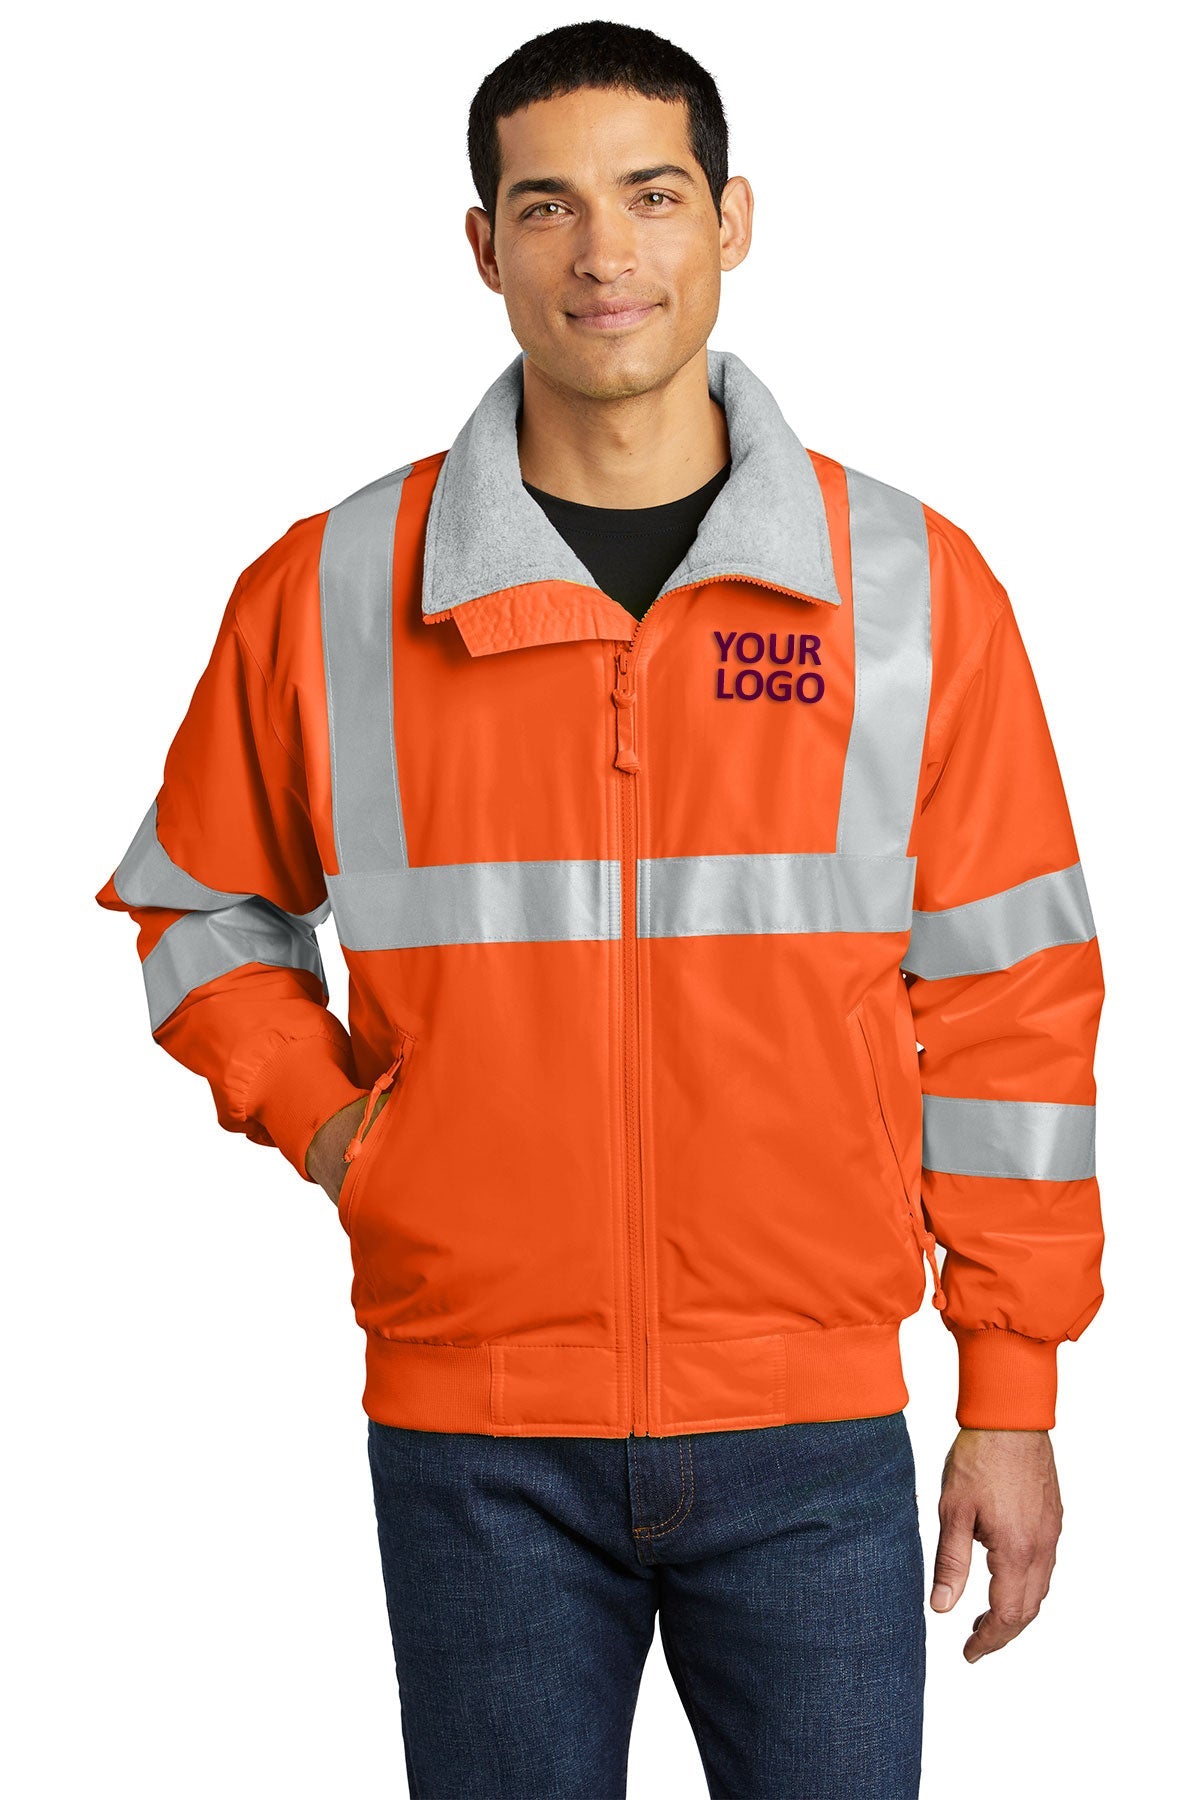 Port Authority Enhanced Visibility Branded Challenger Branded Jackets with Reflective Taping, Safety Orange/ Reflective